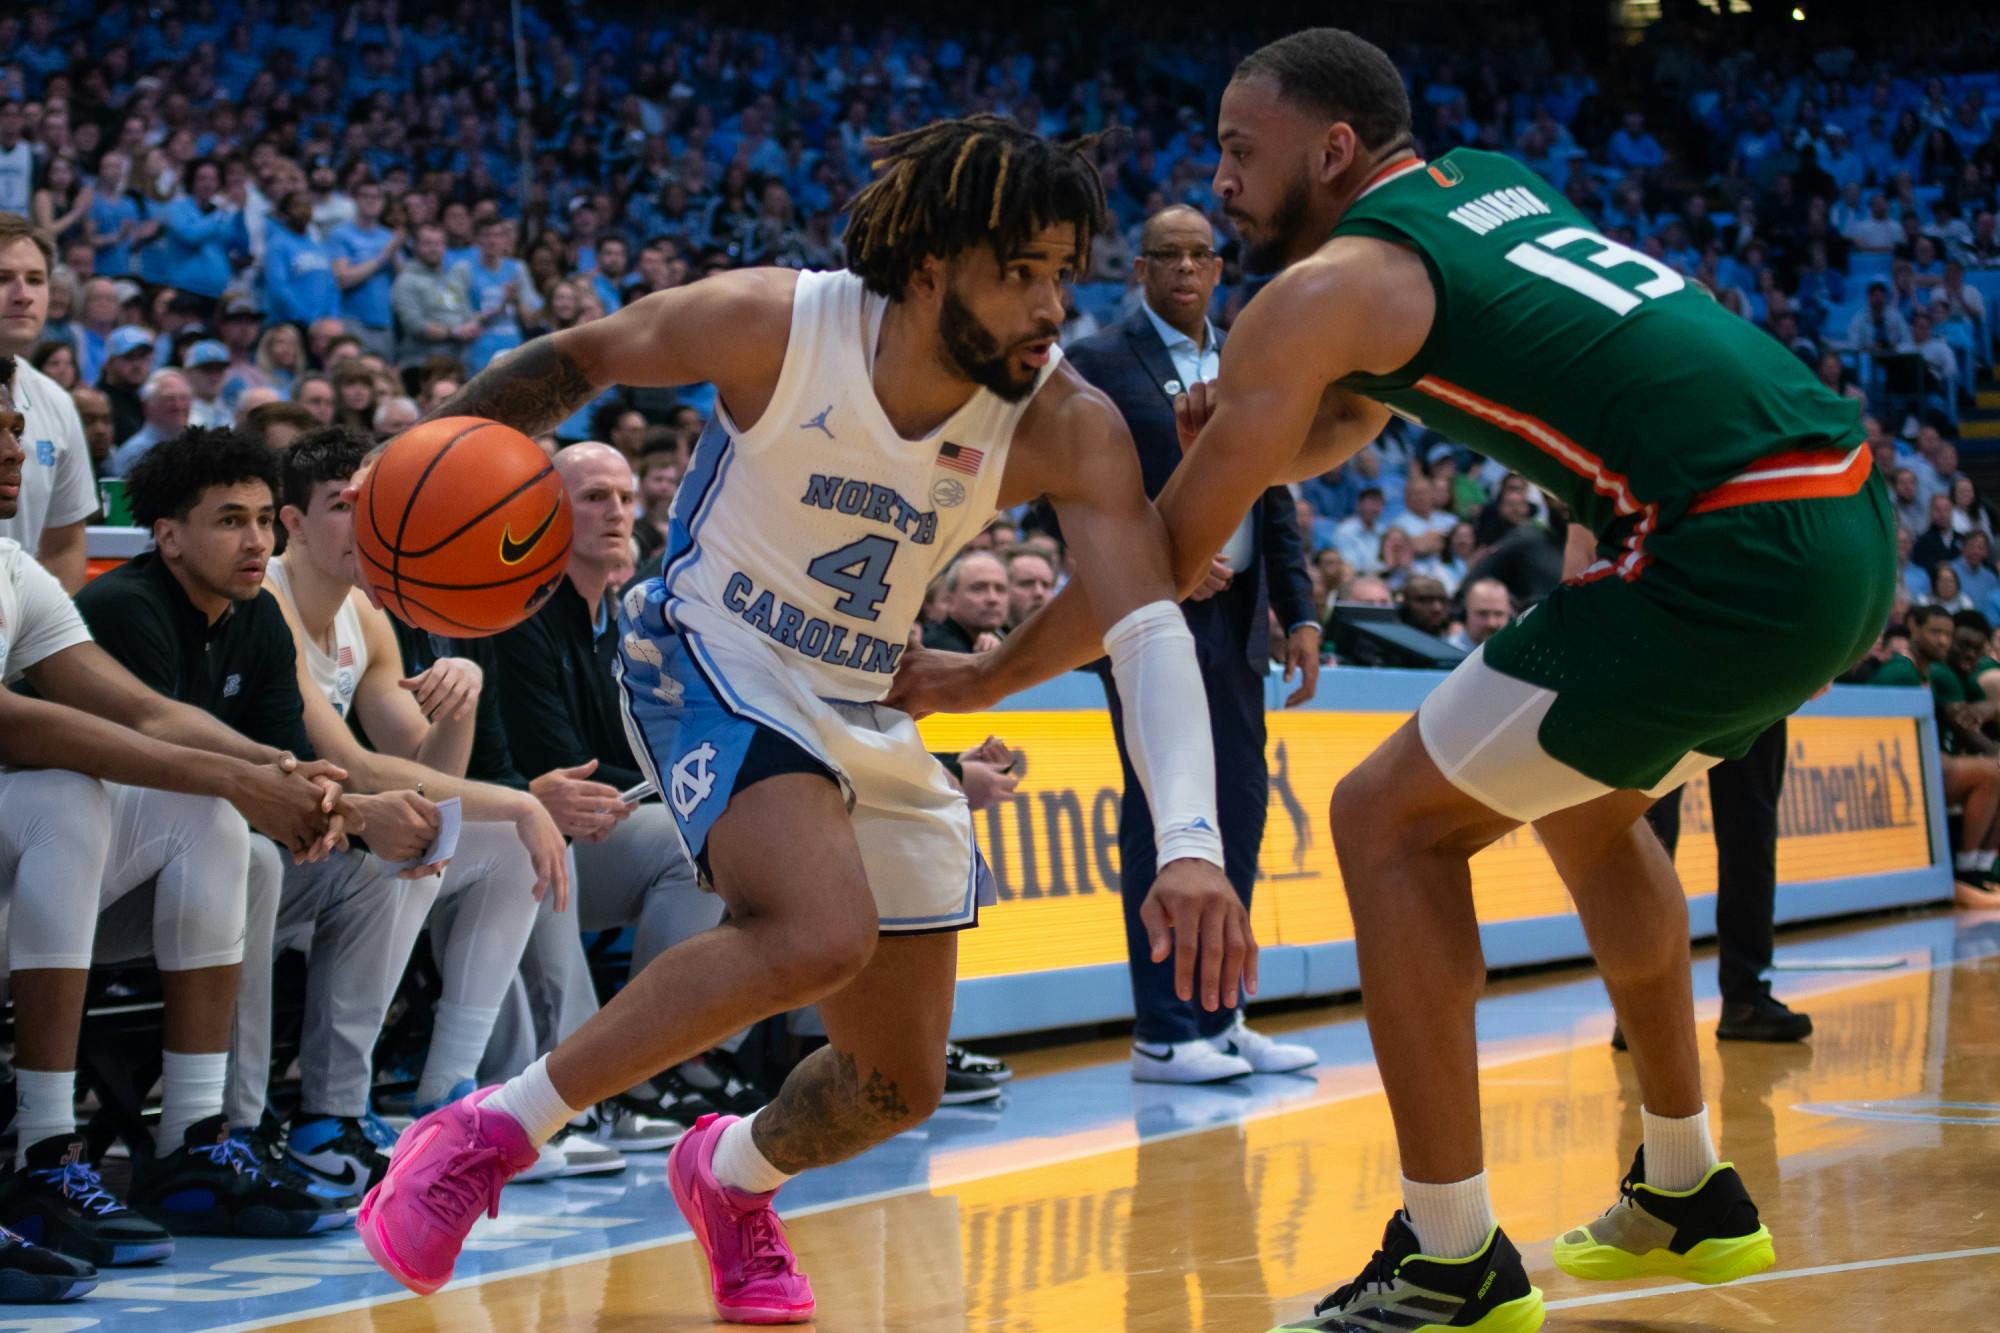 What to know about North Carolina, Marquette's NCAA Tournament foe